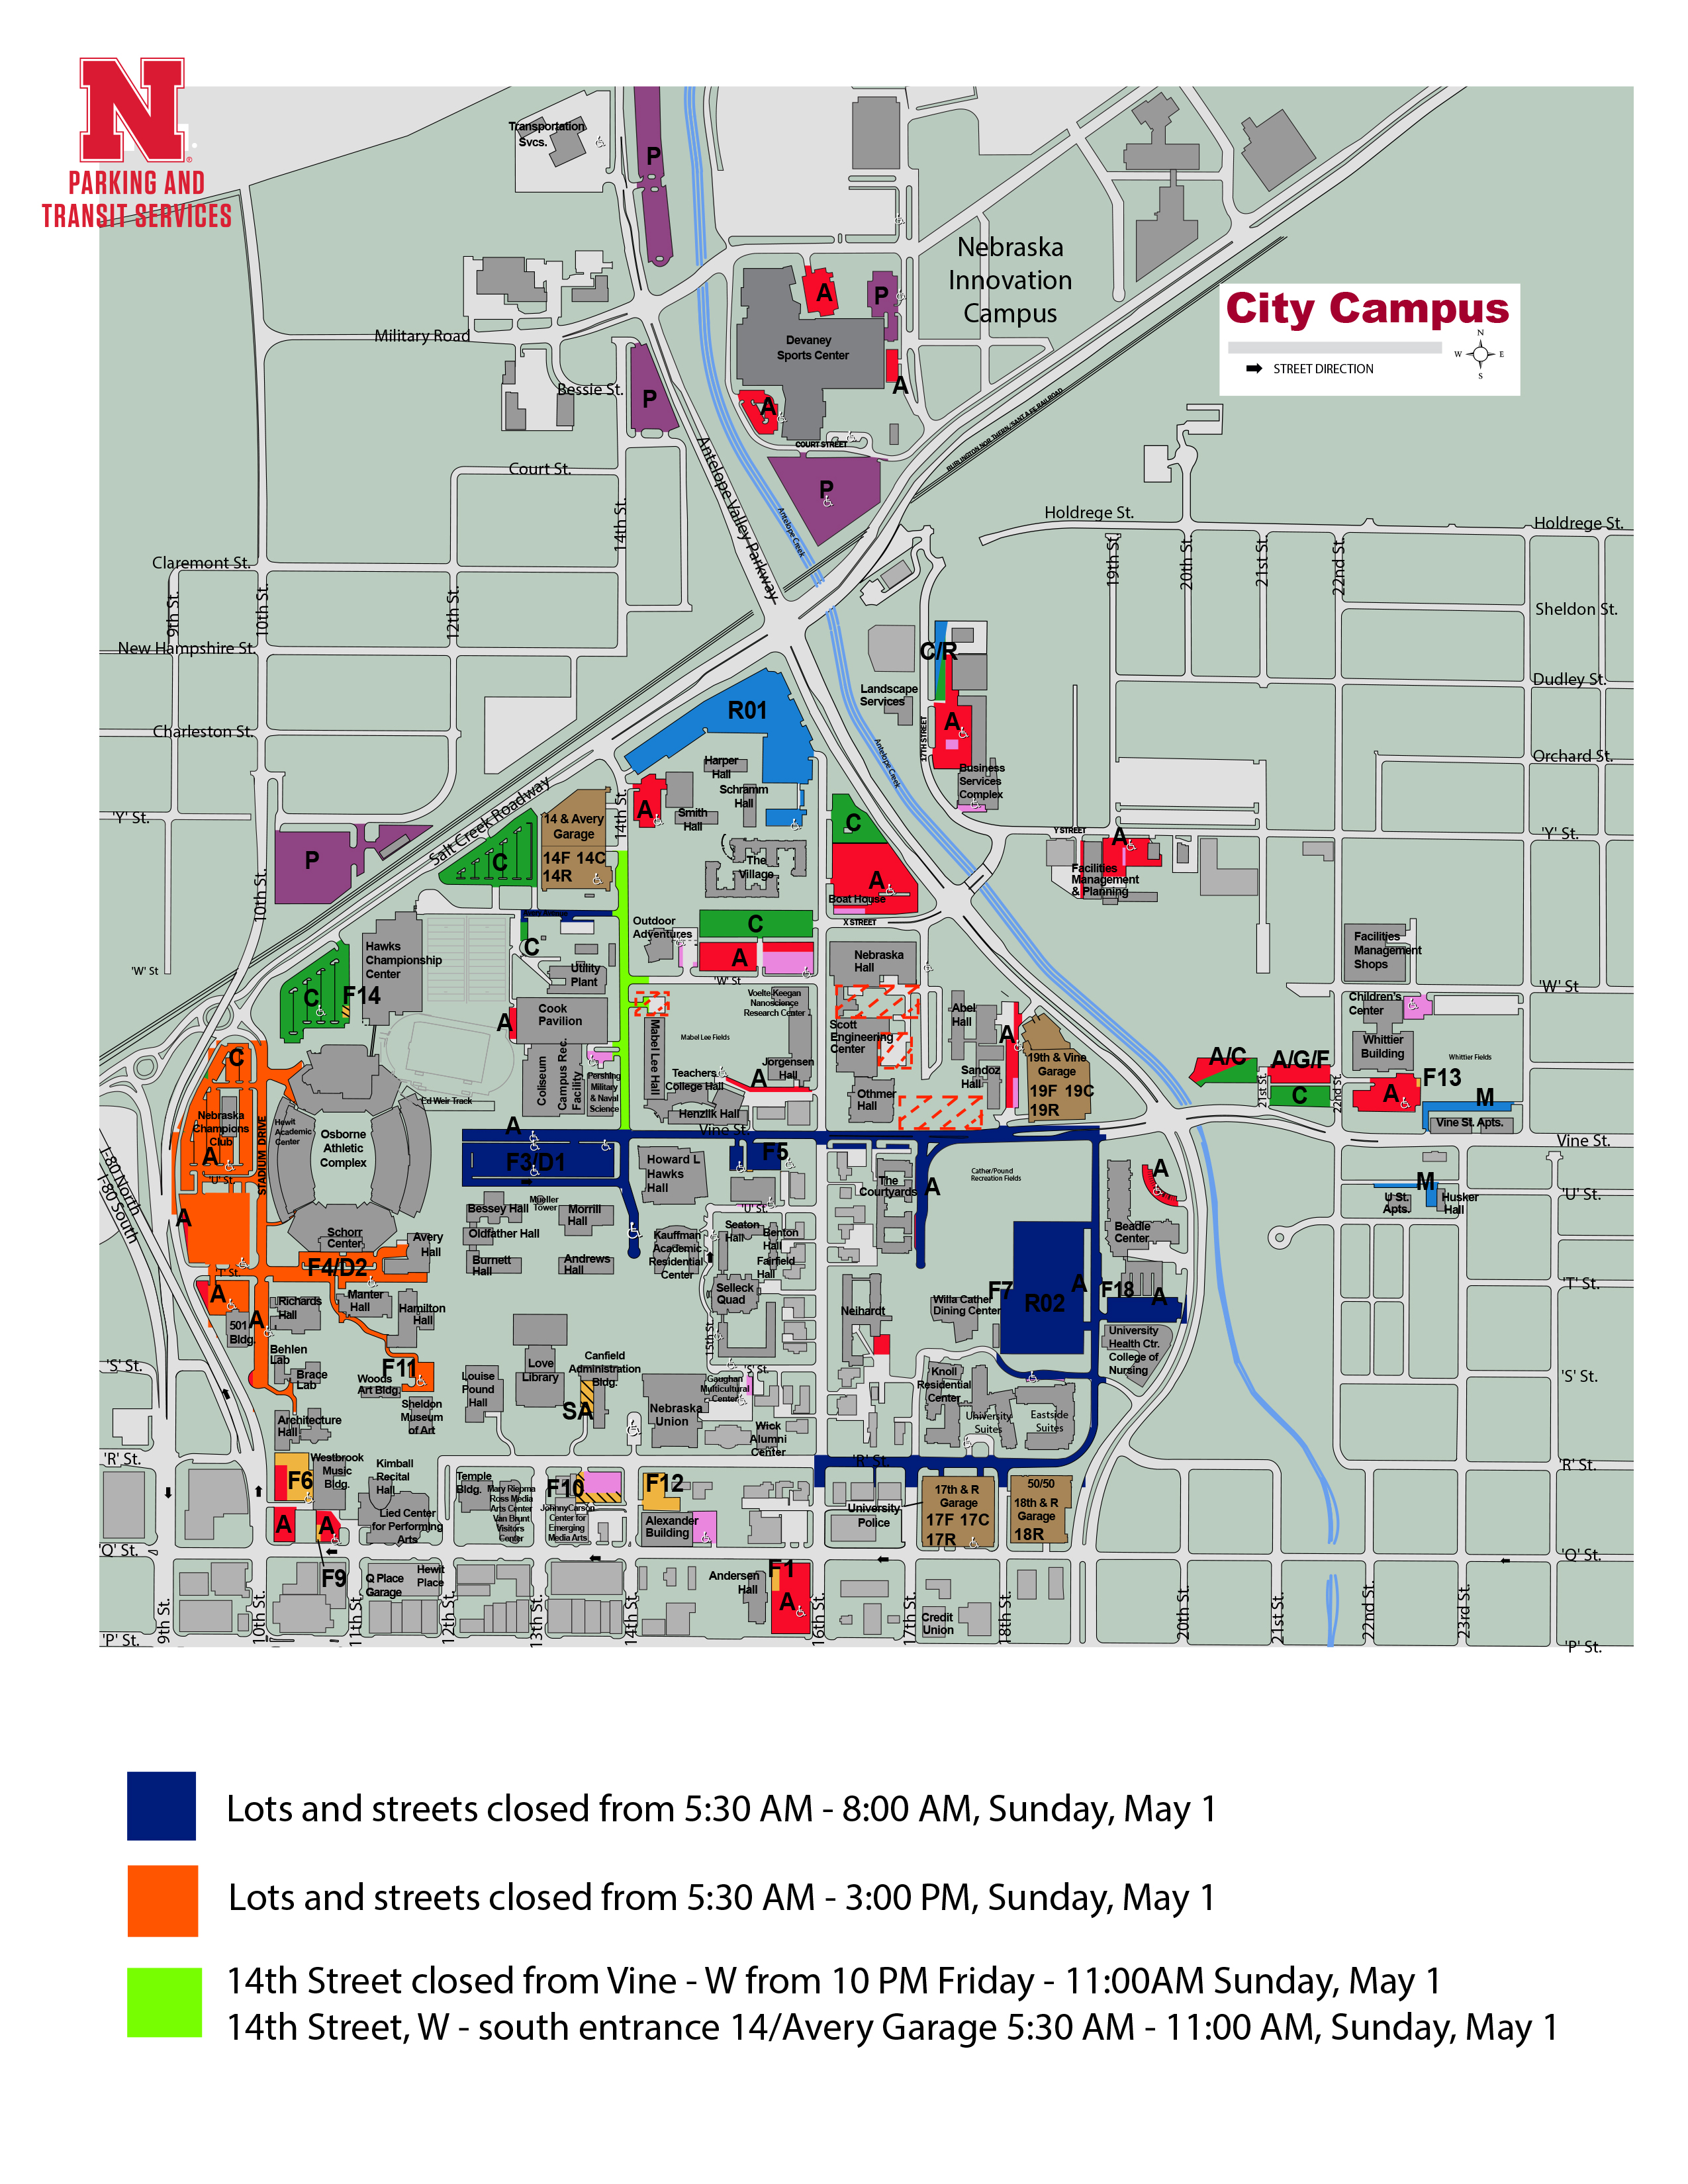 The Lincoln Marathon will be held May 1. City Campus is a key area for the race and related weekend events. The marathon route includes sections of City Campus, including start and finish lines. 